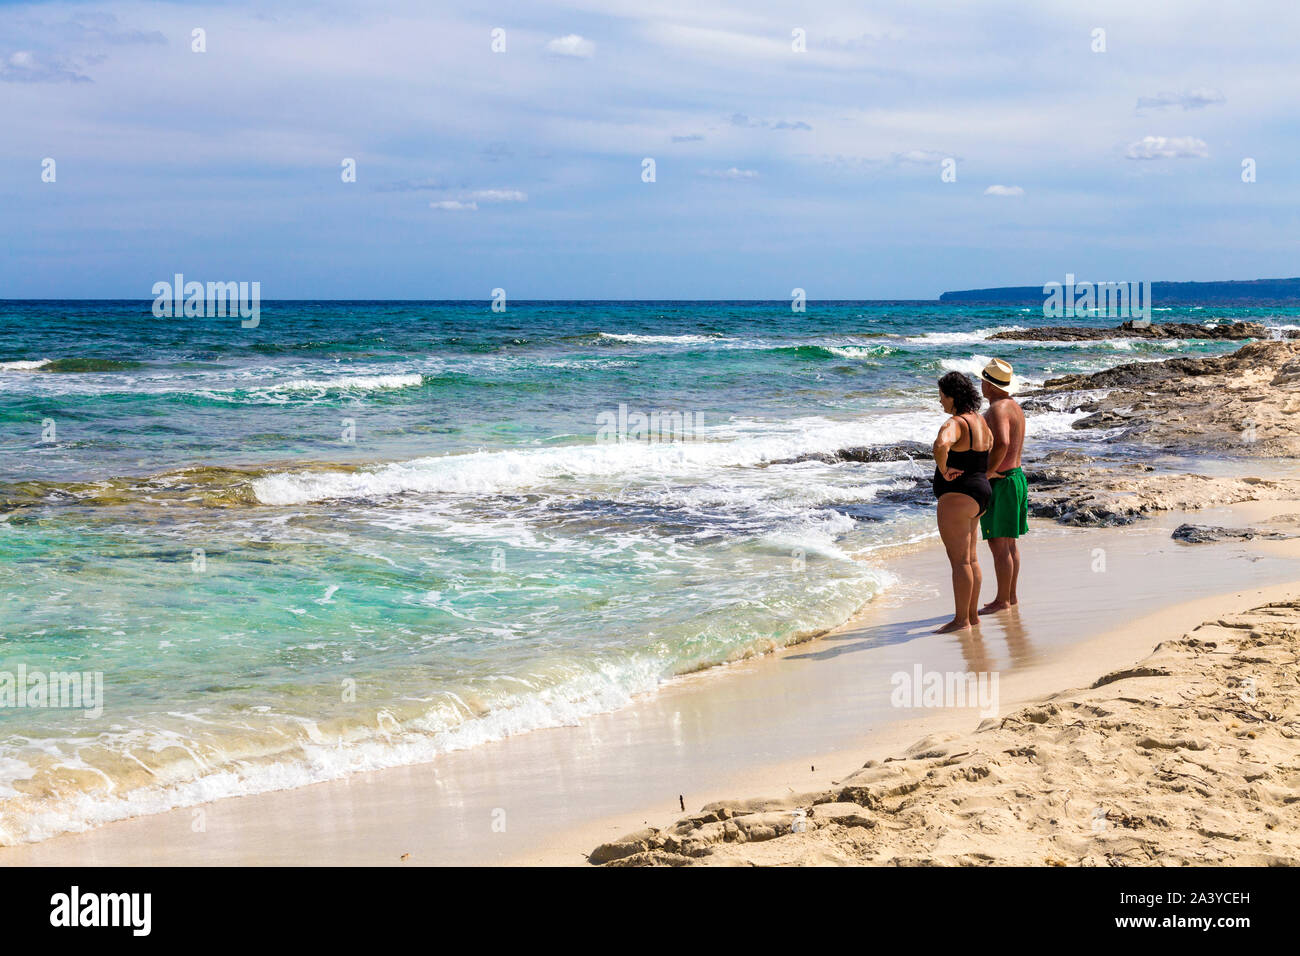 Couple standing on the beach looking out to sea on S'Espalmador island, Formentera, Spain Stock Photo